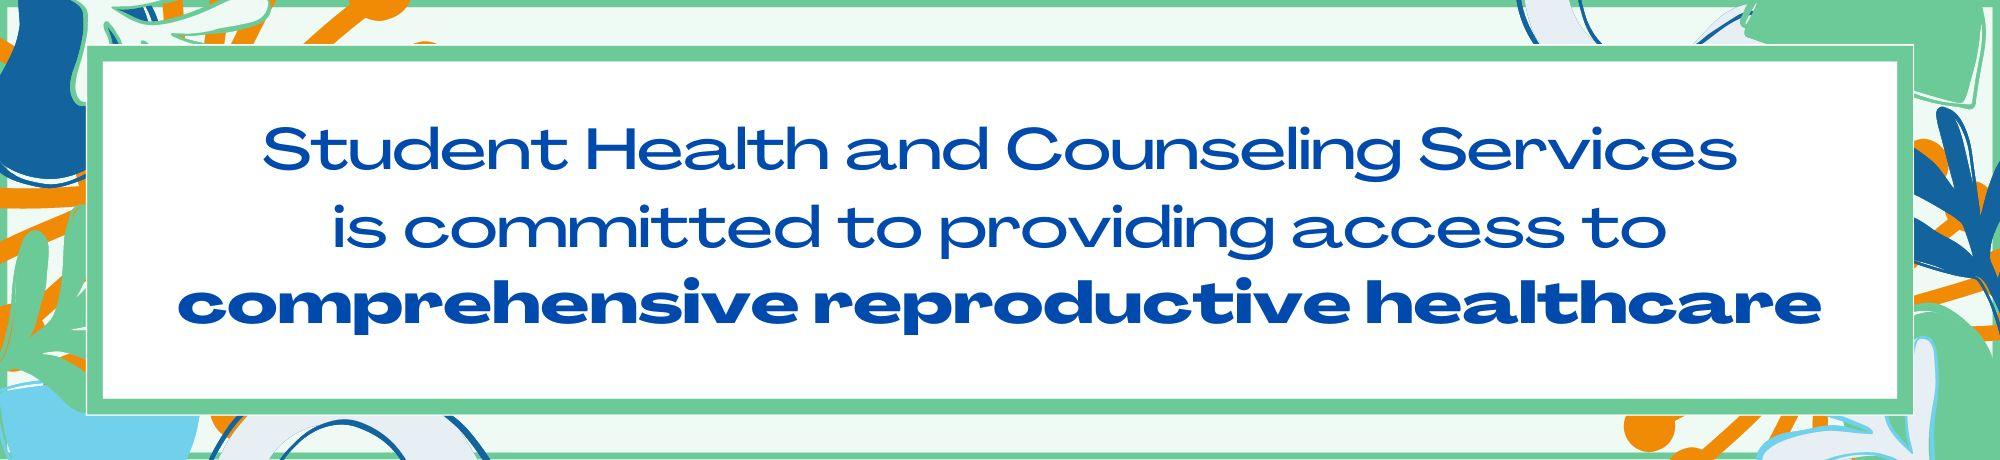 Comprehensive Reproductive Services banner